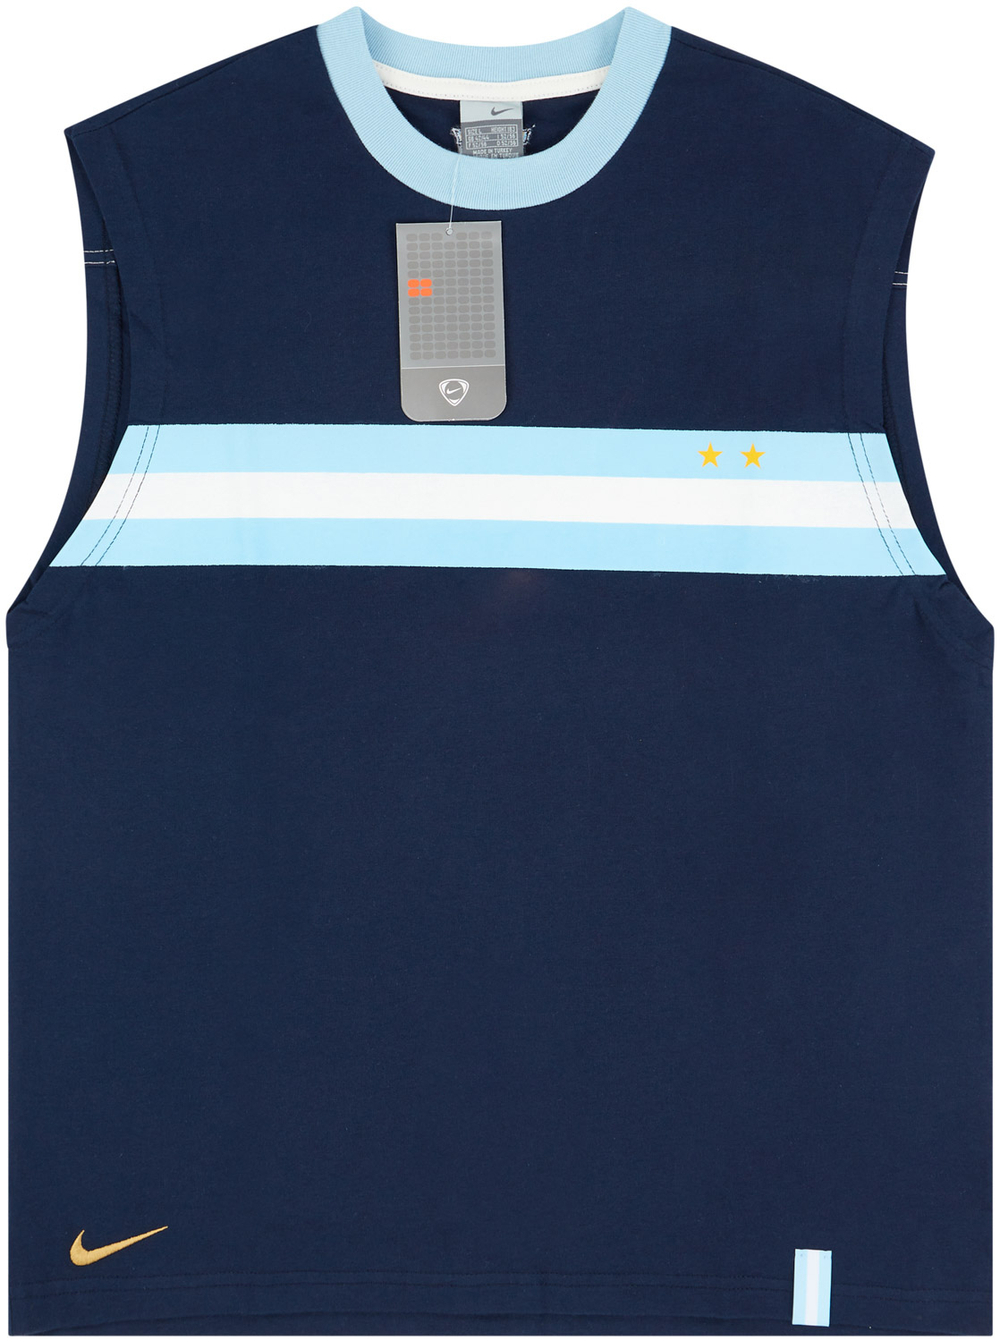 2004-05 Argentina Nike Leisure Vest *BNIB*-Argentina Featured Products View All Clearance Classic Clearance Training Classic Training